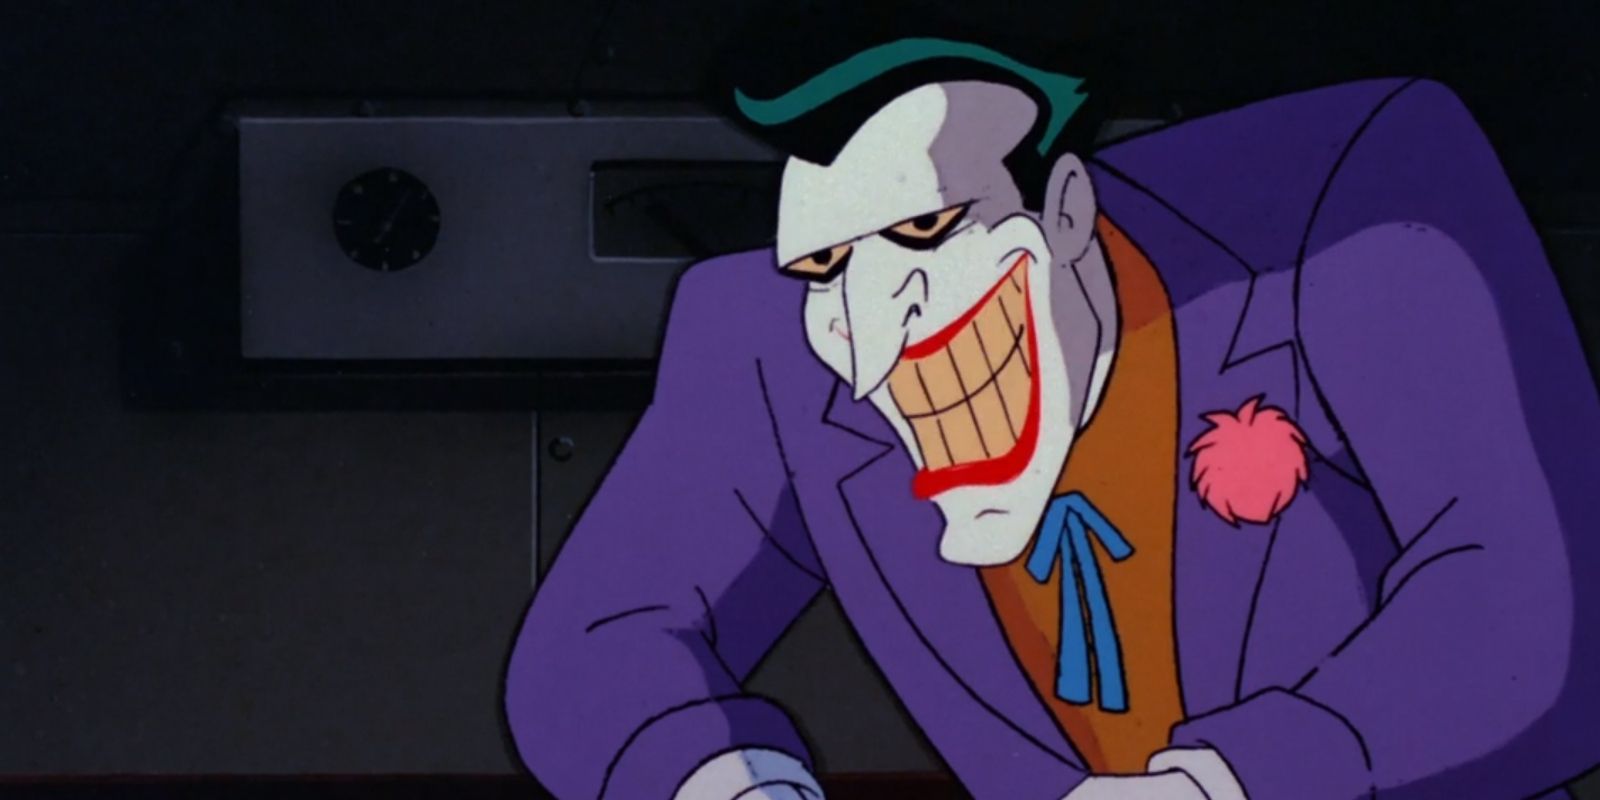 The Joker grinning aboard his garbage barge in The Last Laugh of Batman: The Animated Series